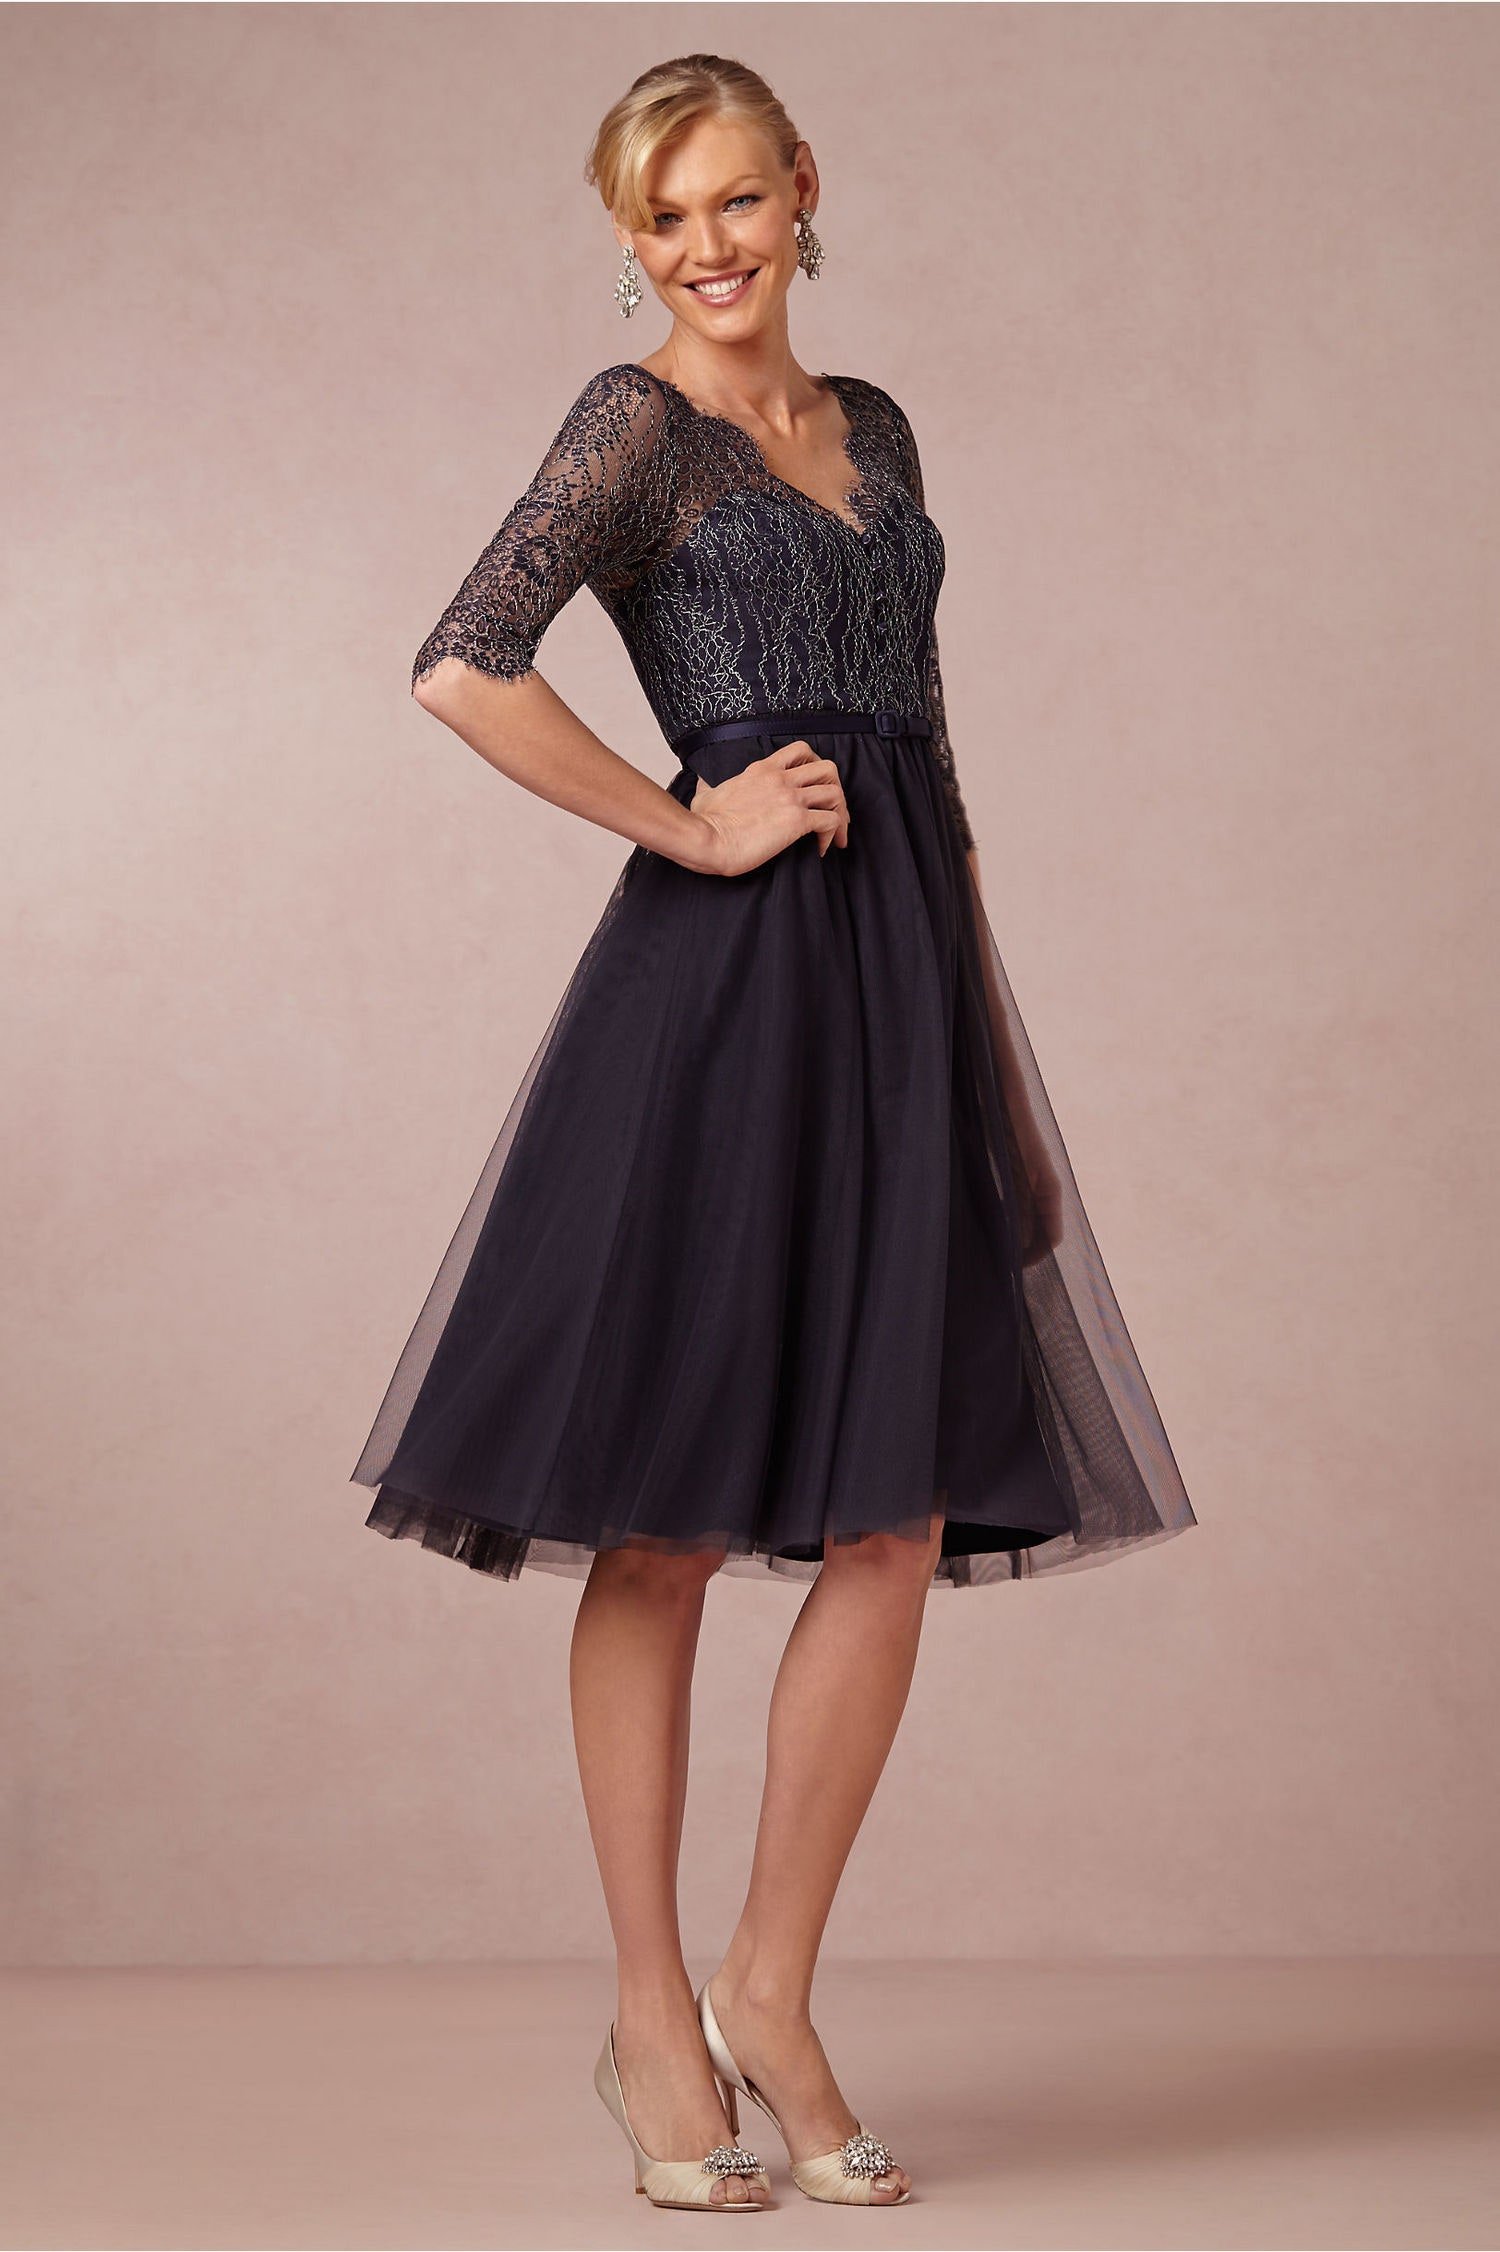 7 Dresses to Wear to a Winter Wedding, 